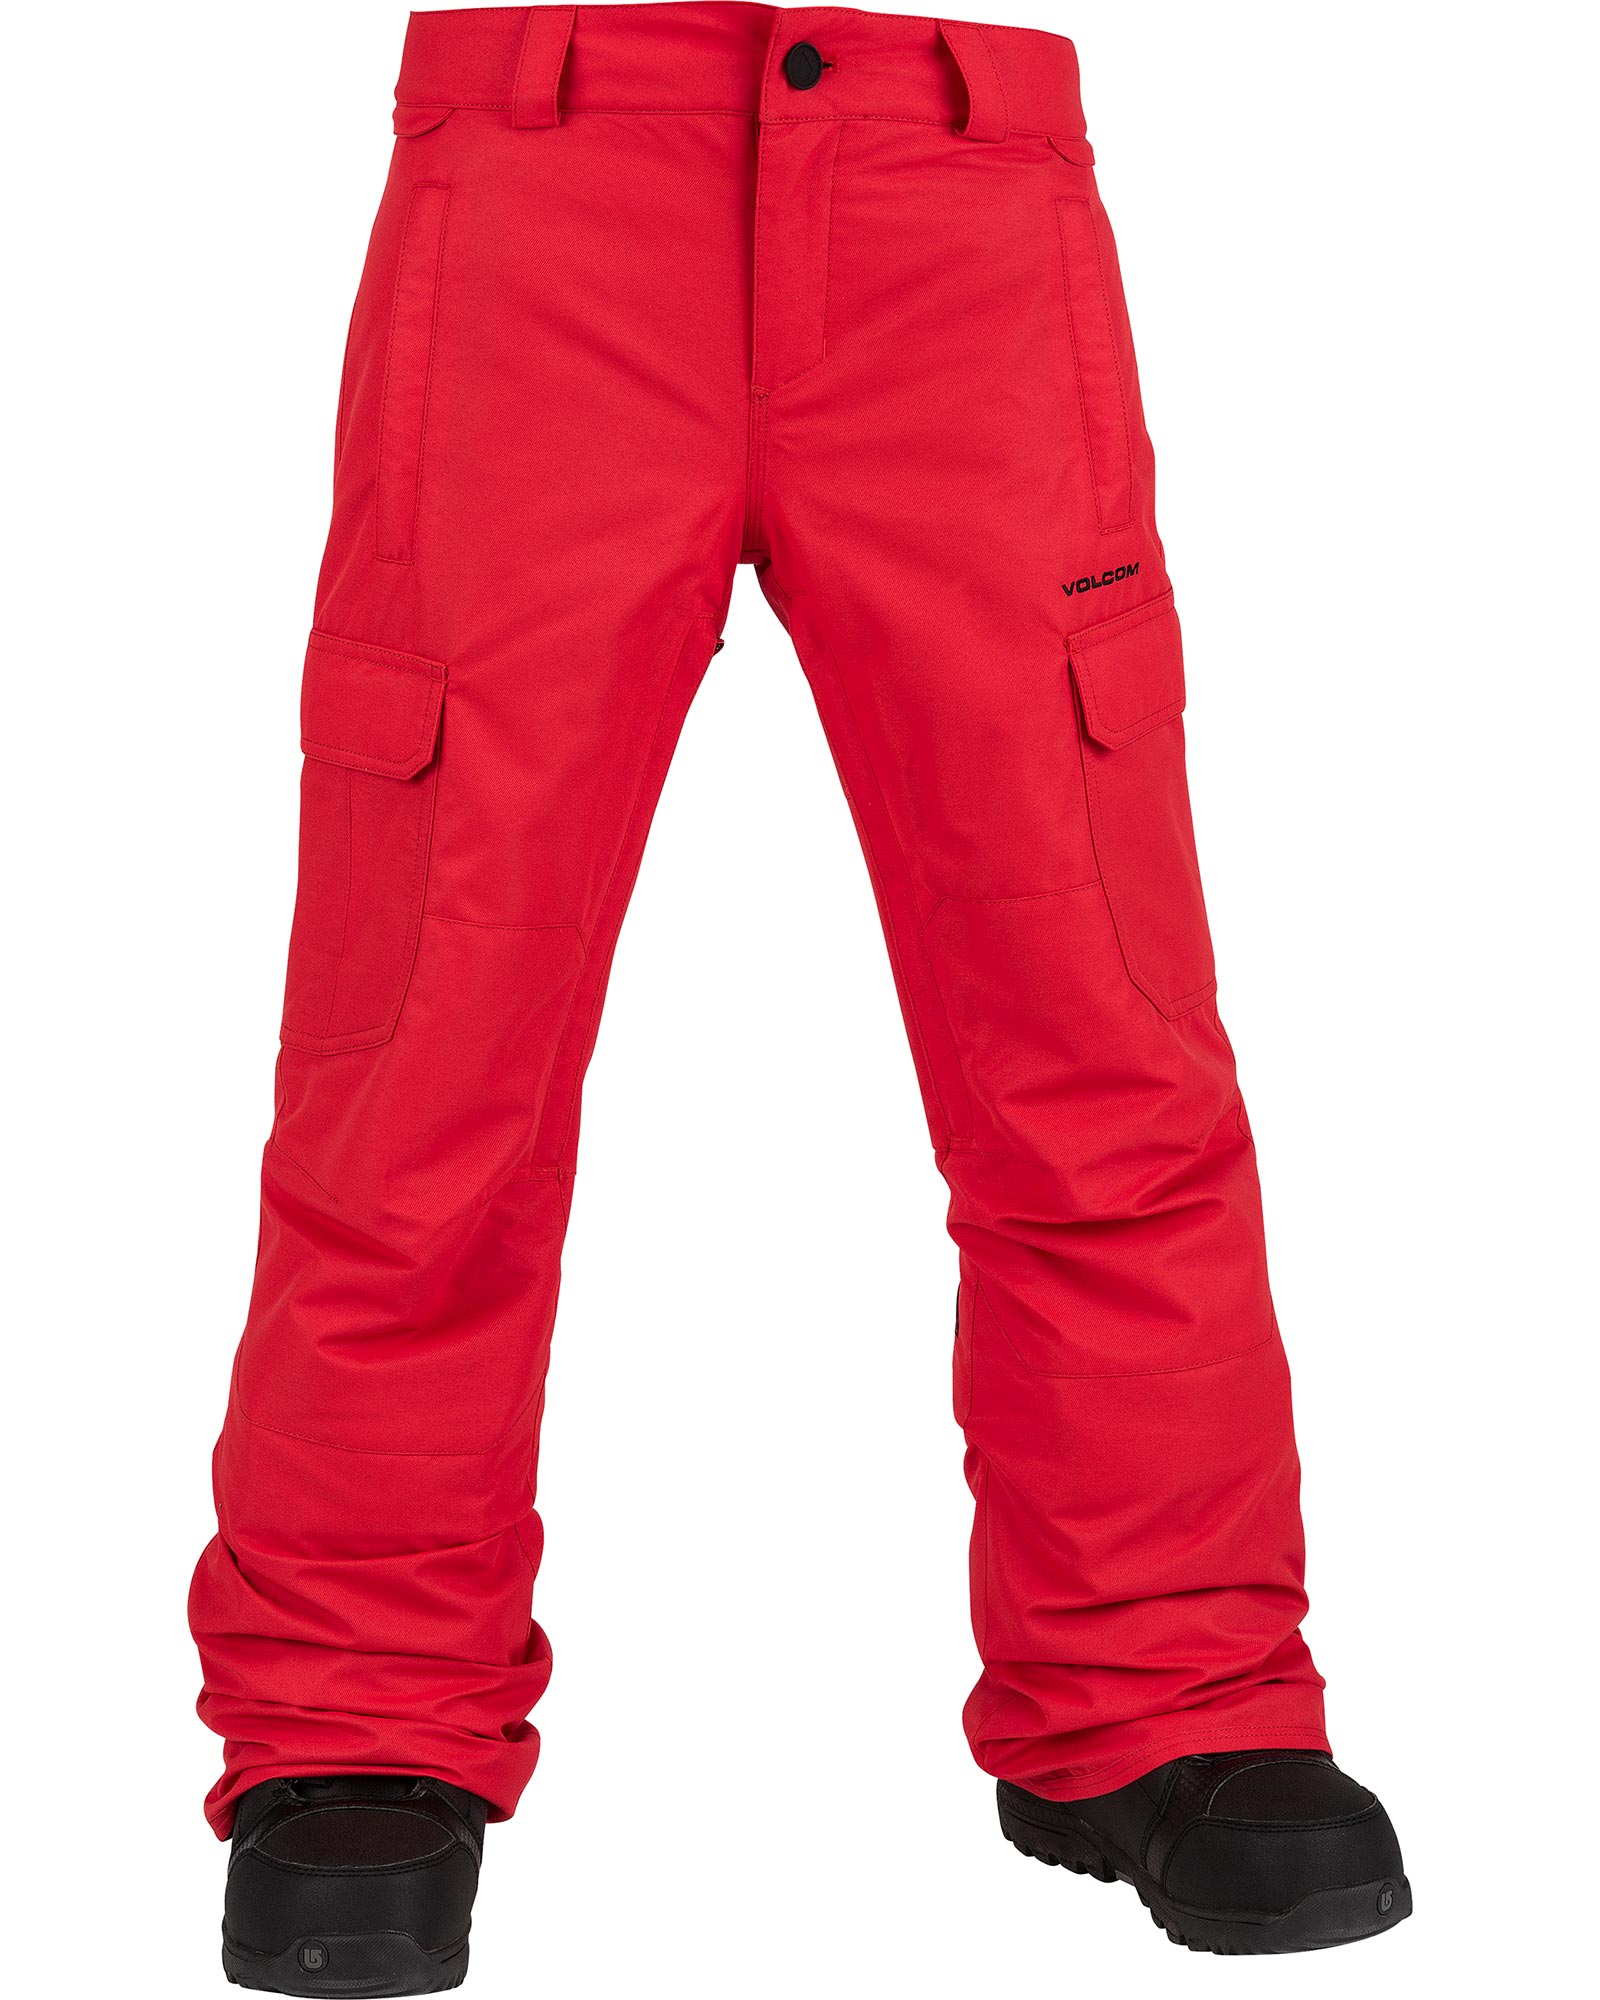 Volcom Cargo Insulated Boys’ Pants - Red 8 Years